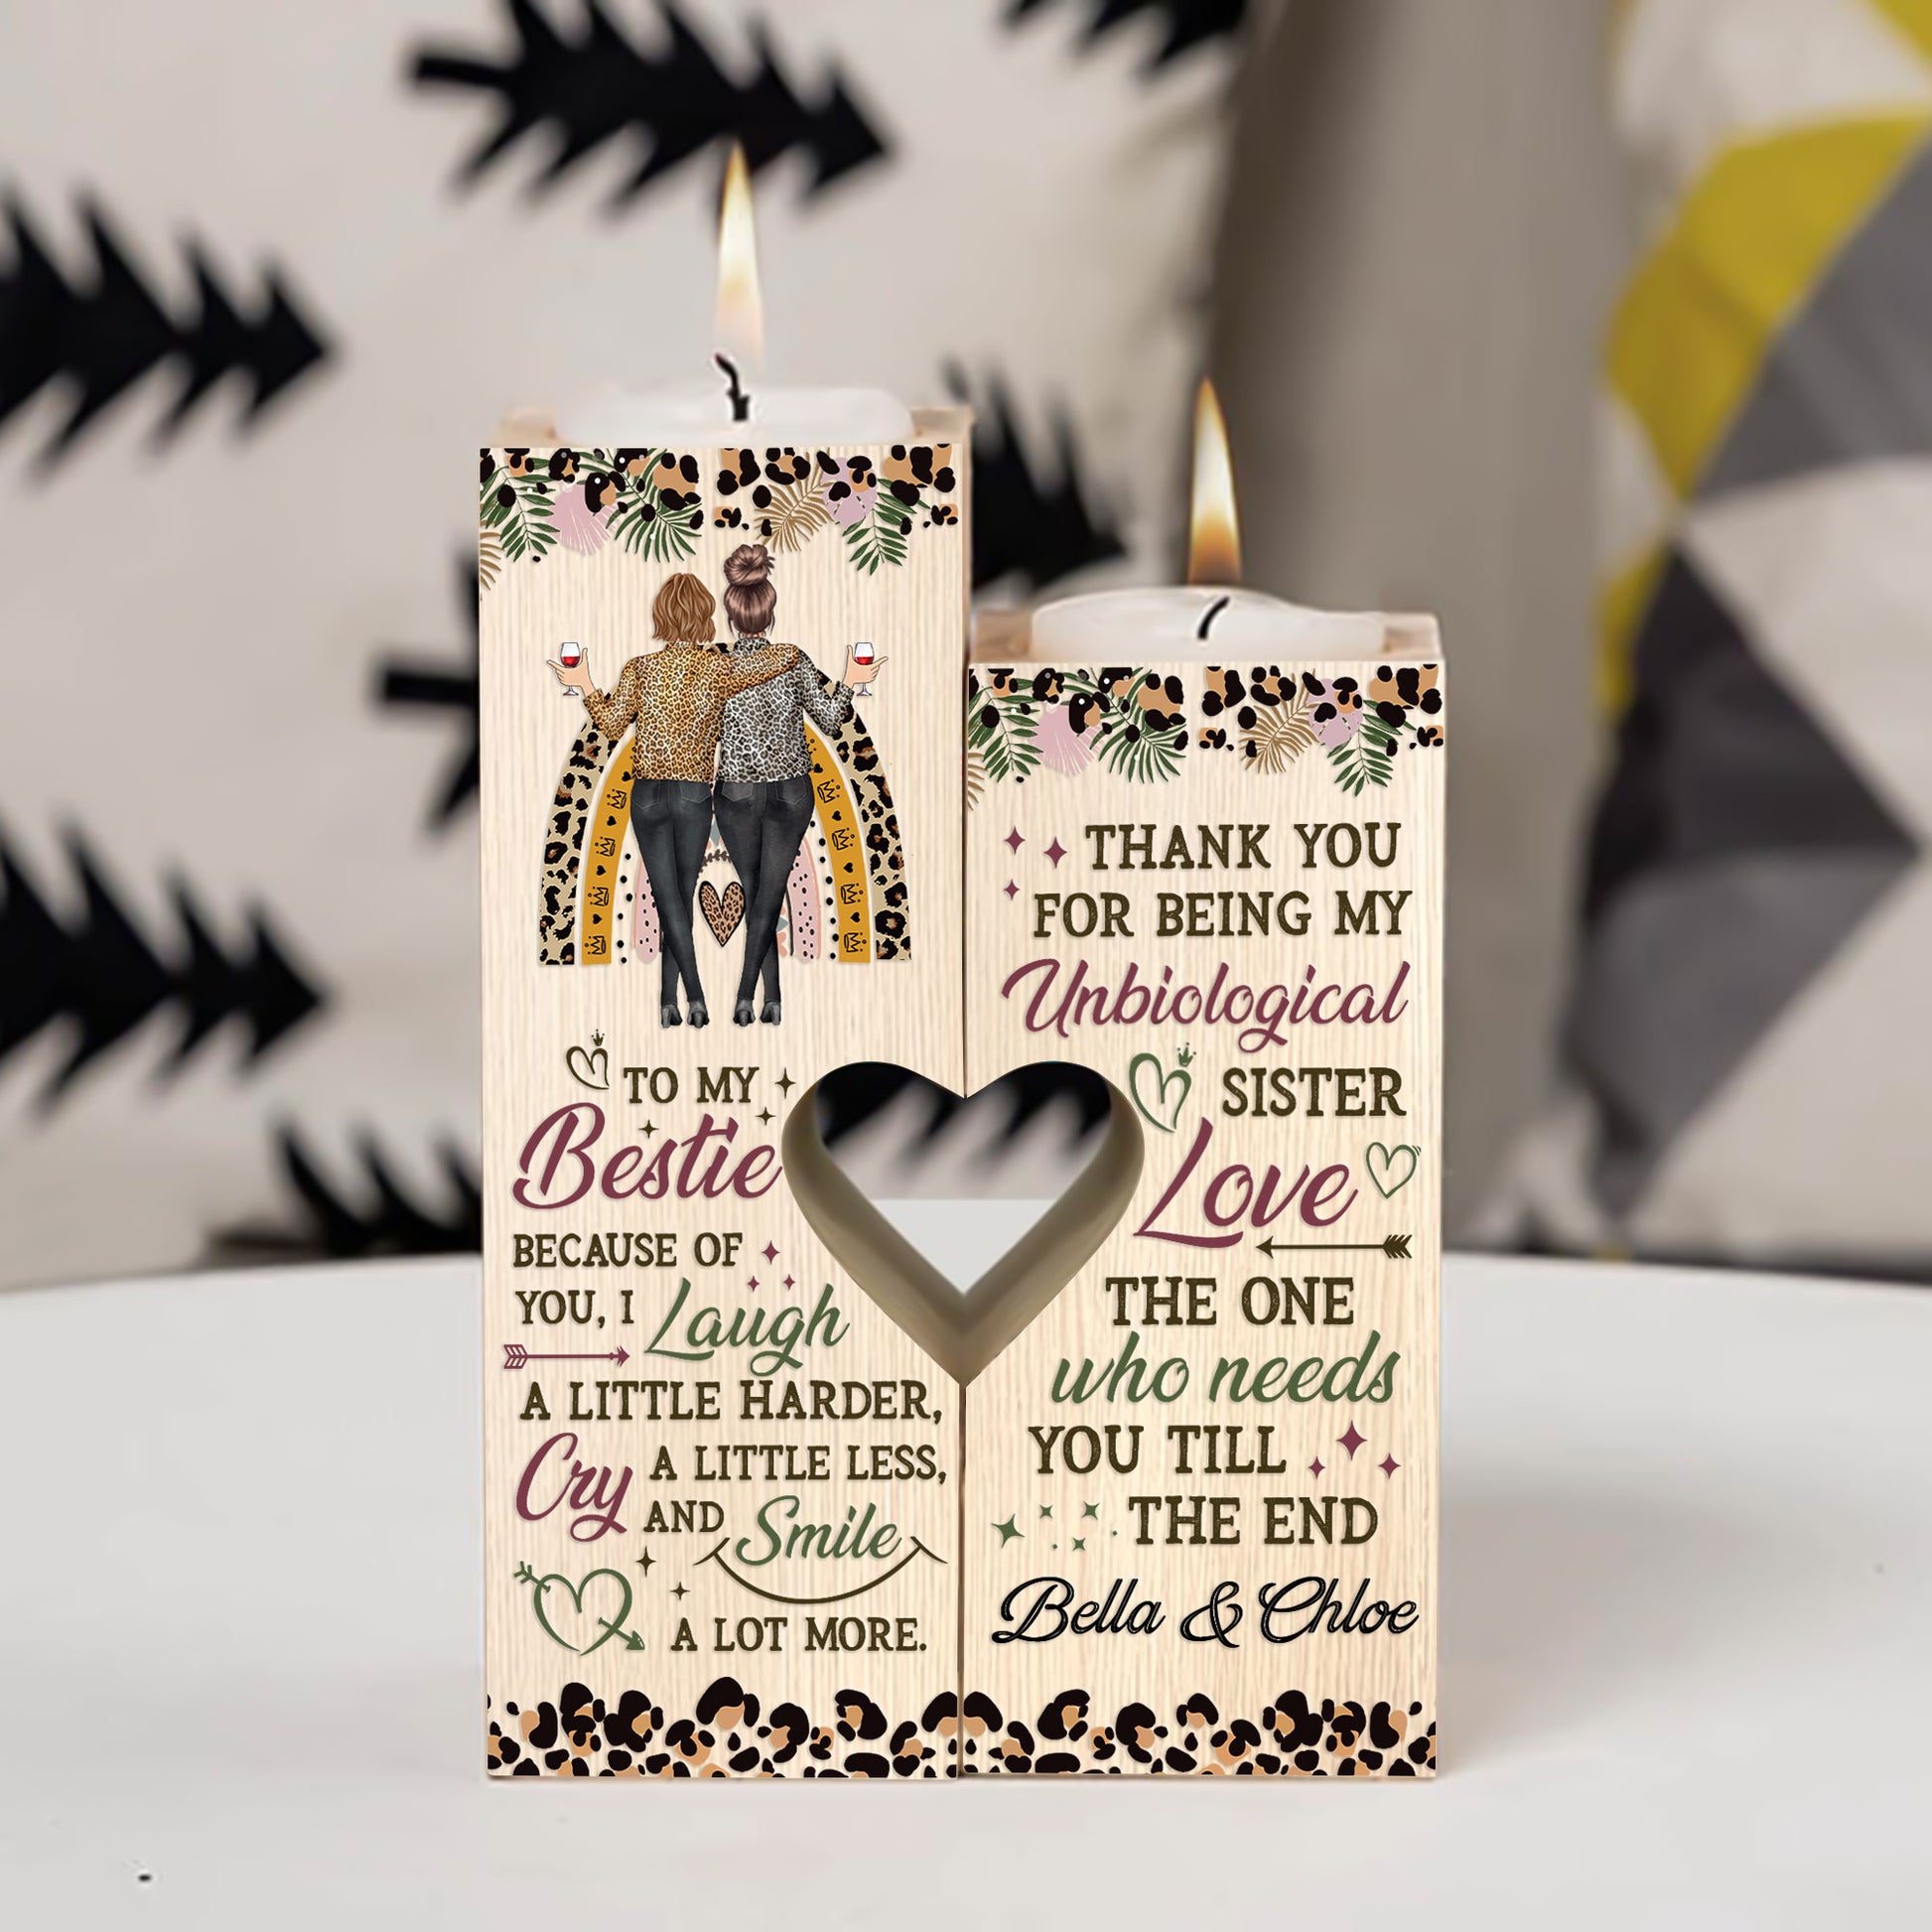 Thanks For Being My Unbiological Sister - Personalized Wood Candle Holder - Birthday, Heartwarming Gift For Besties, Friends, Soul Sisters, BFFs